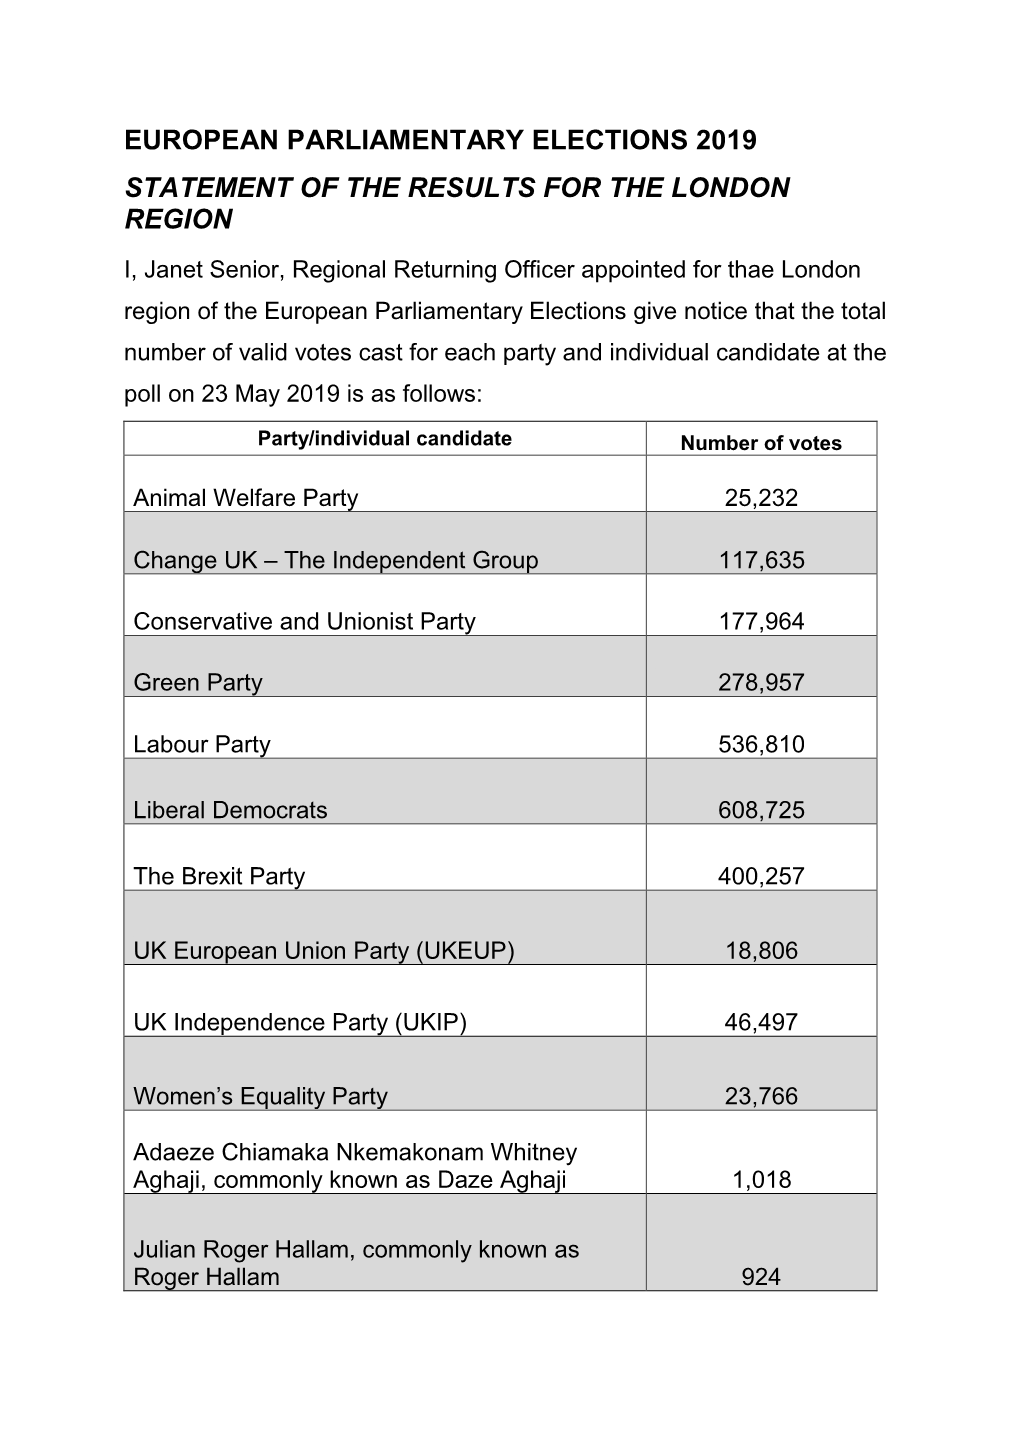 European Parliamentary Elections 2019 Statement of the Results for the London Region